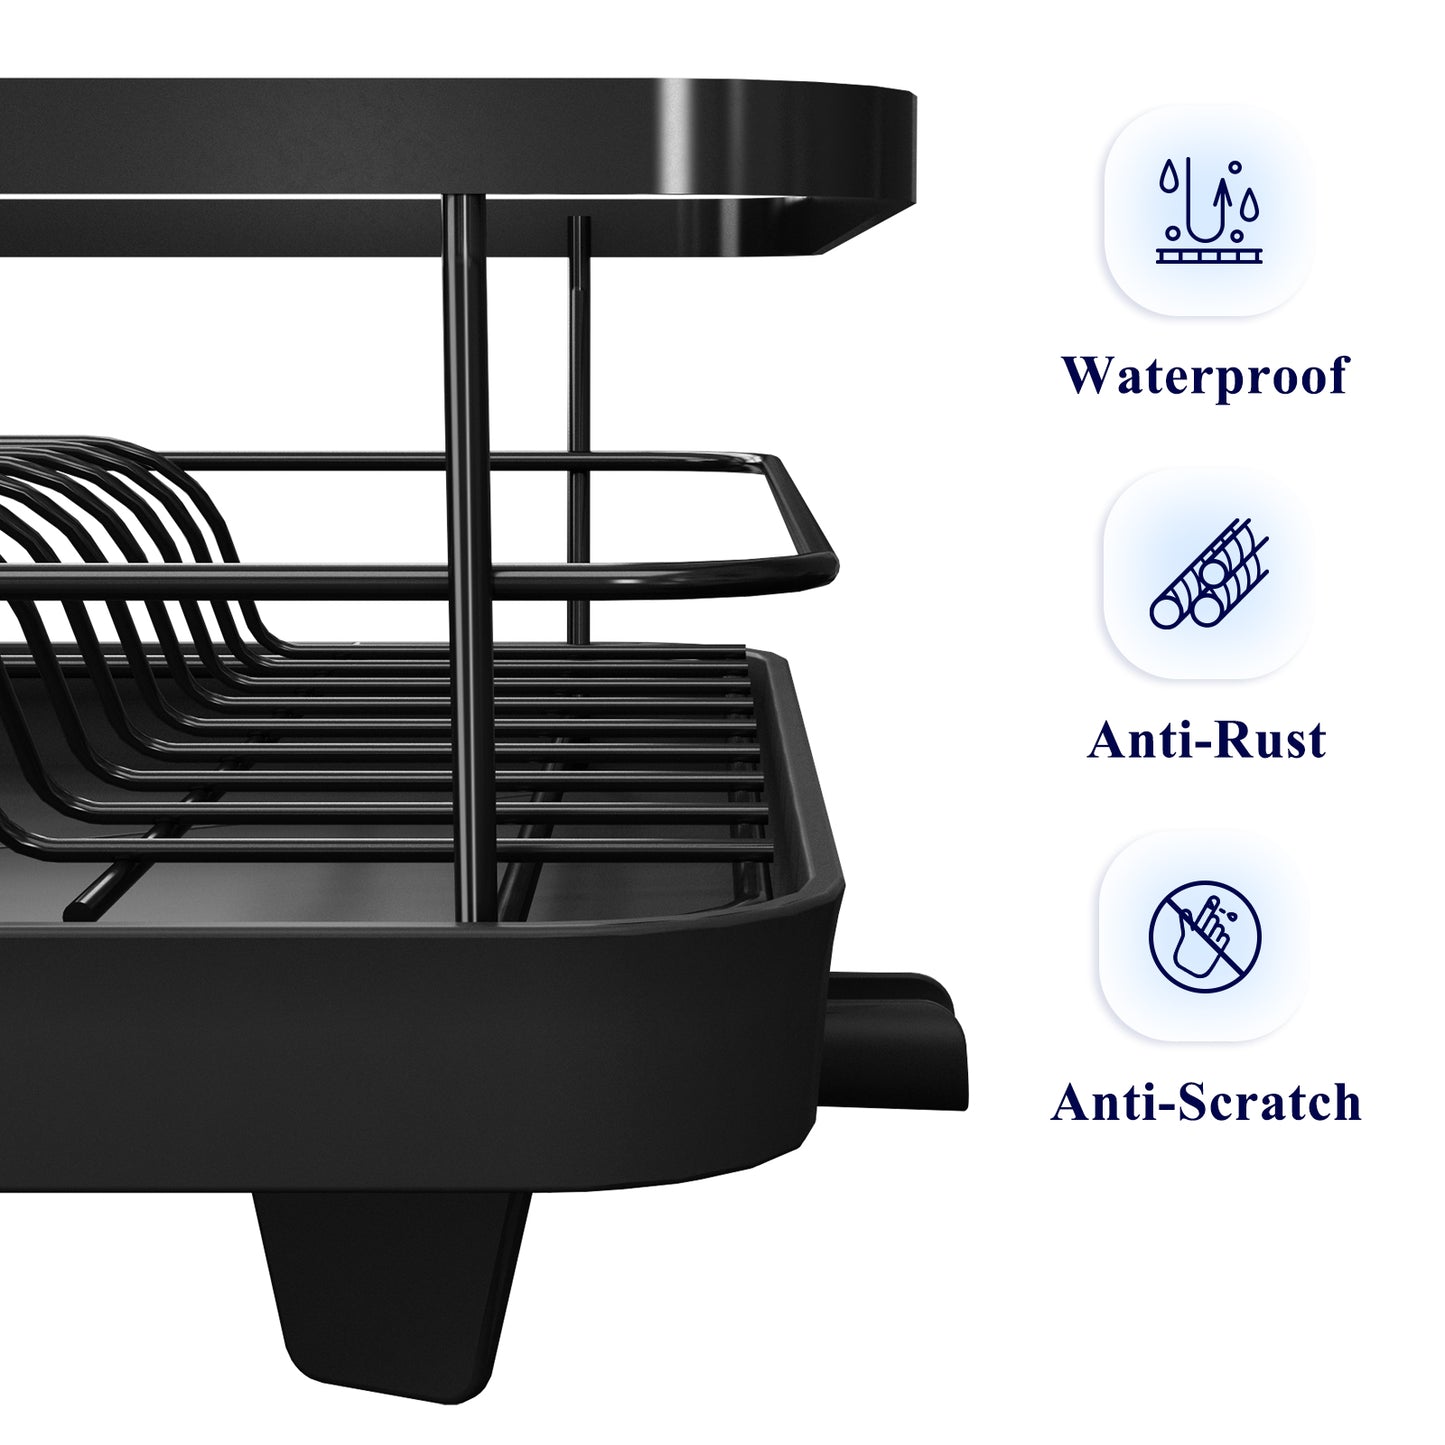 Kitsure Dish Drying Rack- Space-Saving Dish Rack, Dish Racks for Kitchen Counter, Durable Stainless Steel Kitchen Drying Rack with a Cutlery Holder, Black(494)